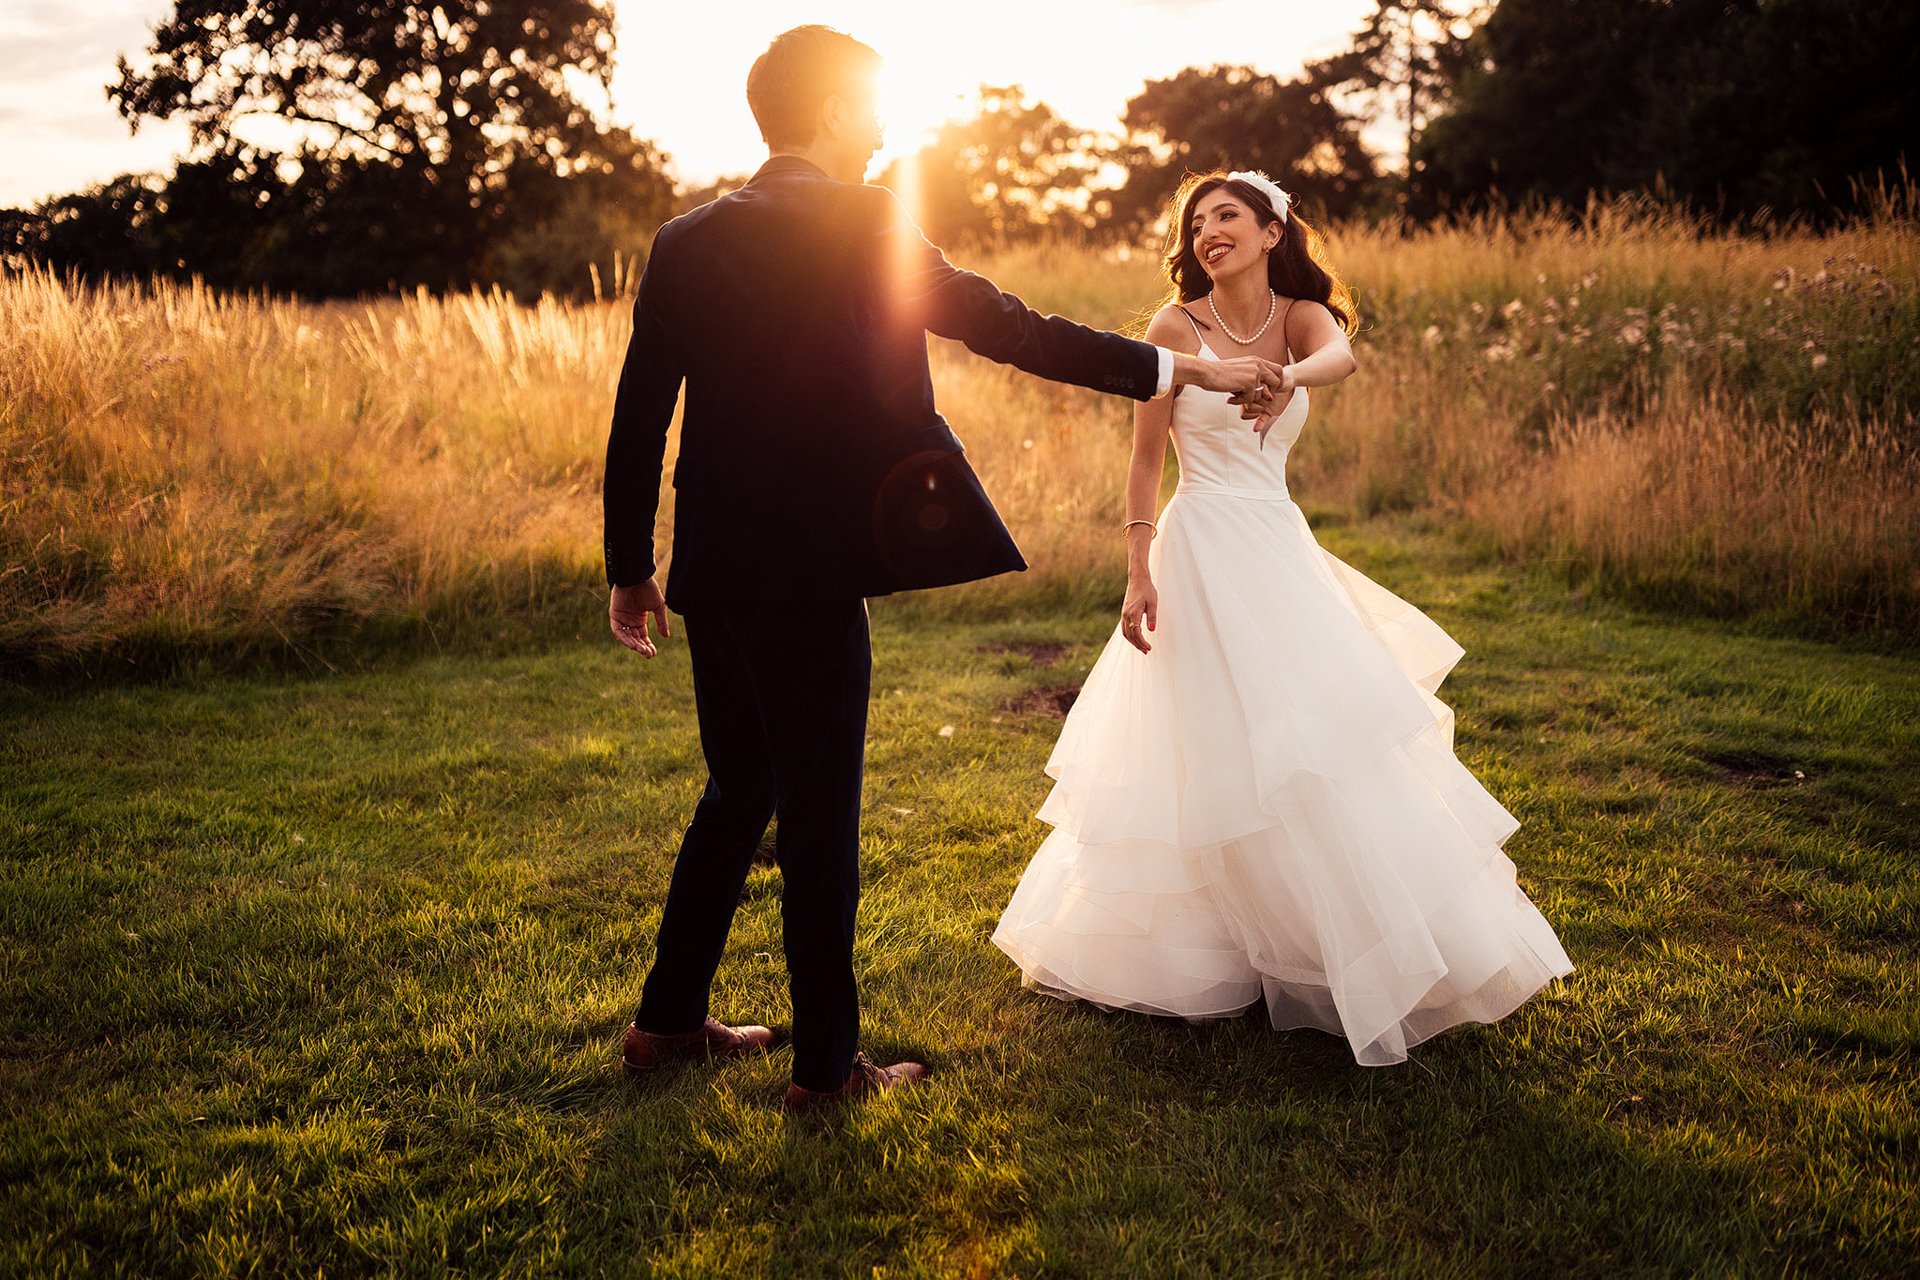 Engagement story: how he proposed. Photo of bride and groom dancing at sunset outdoors at wild wedding venue elmore court